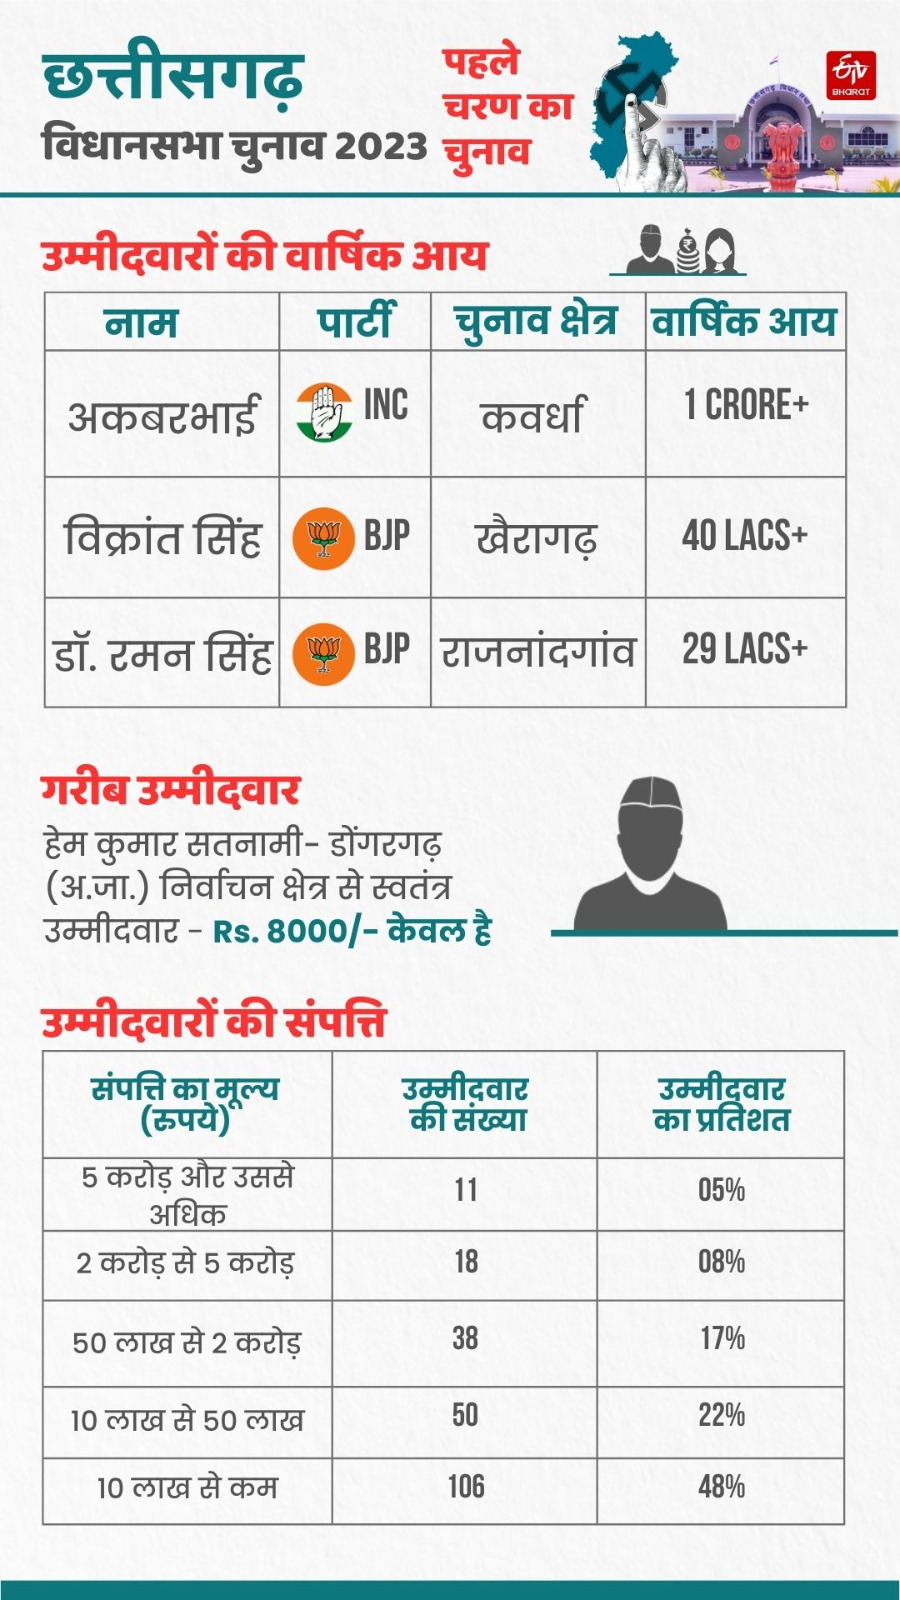 First phase voting in Chhattisgarh elections